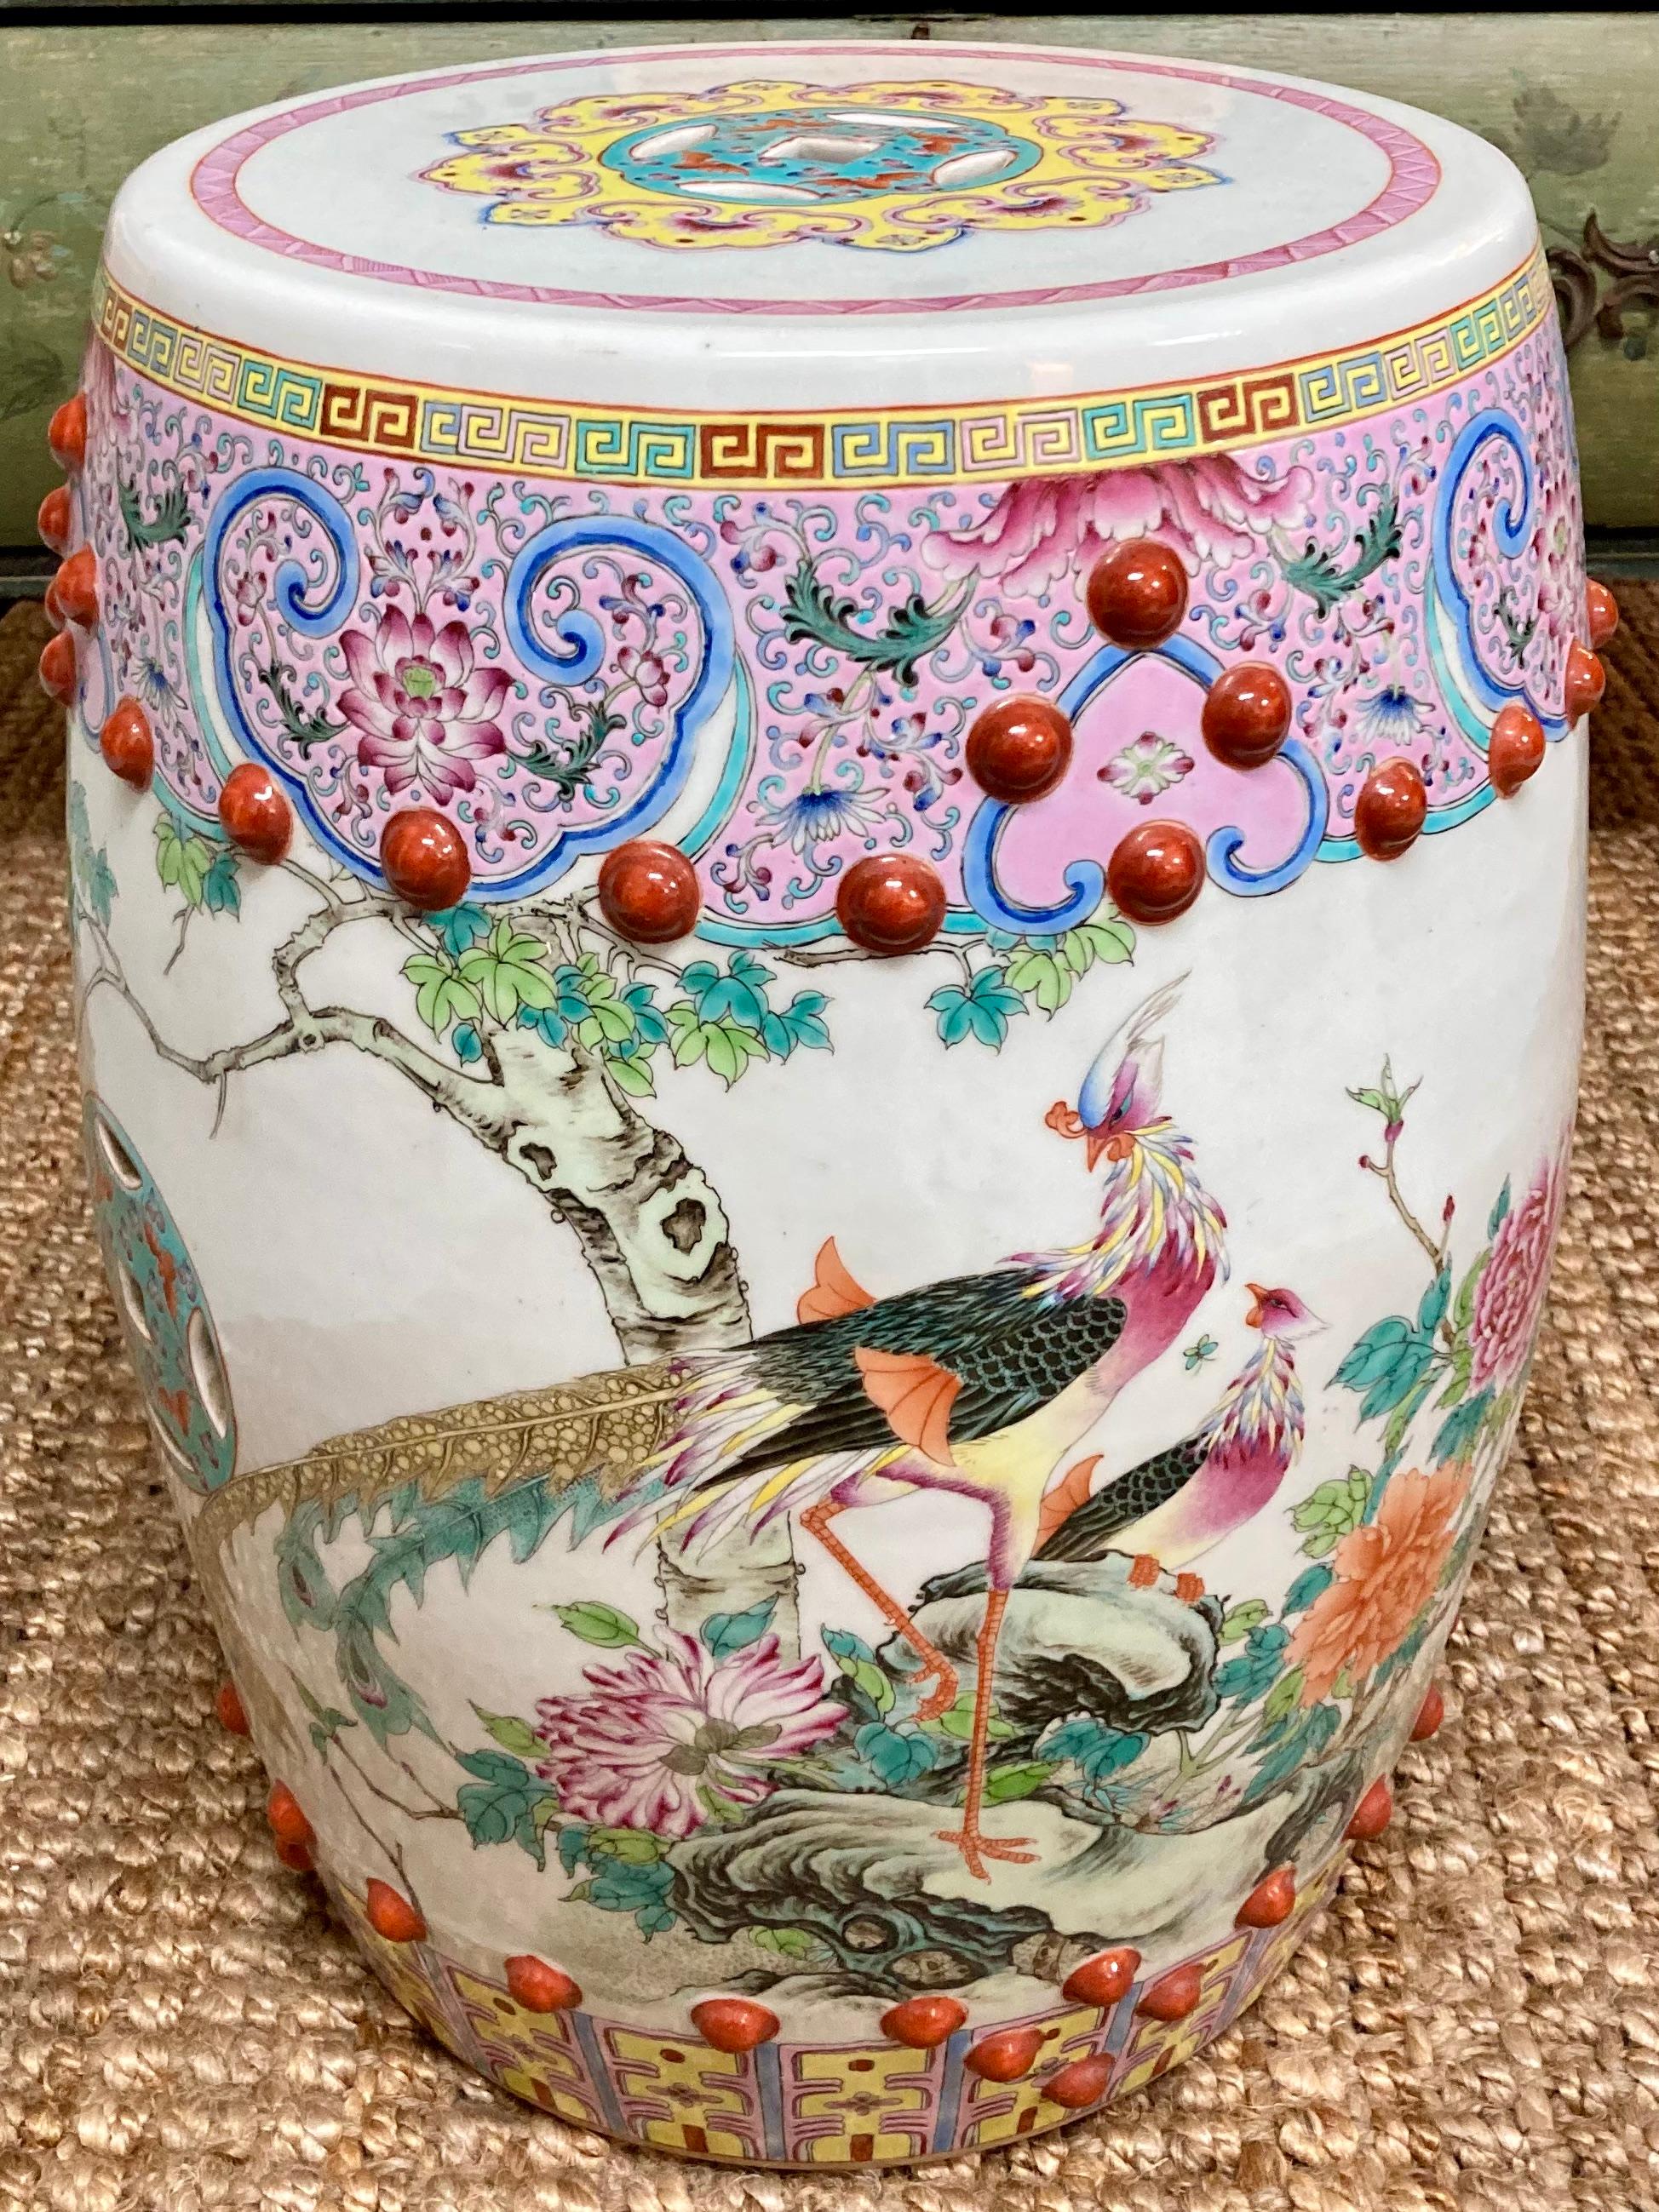 Beautiful Asian floral and fauna garden seat. Amazing design colors and drawings. Great addition to your patio and garden for drinks and snacks.